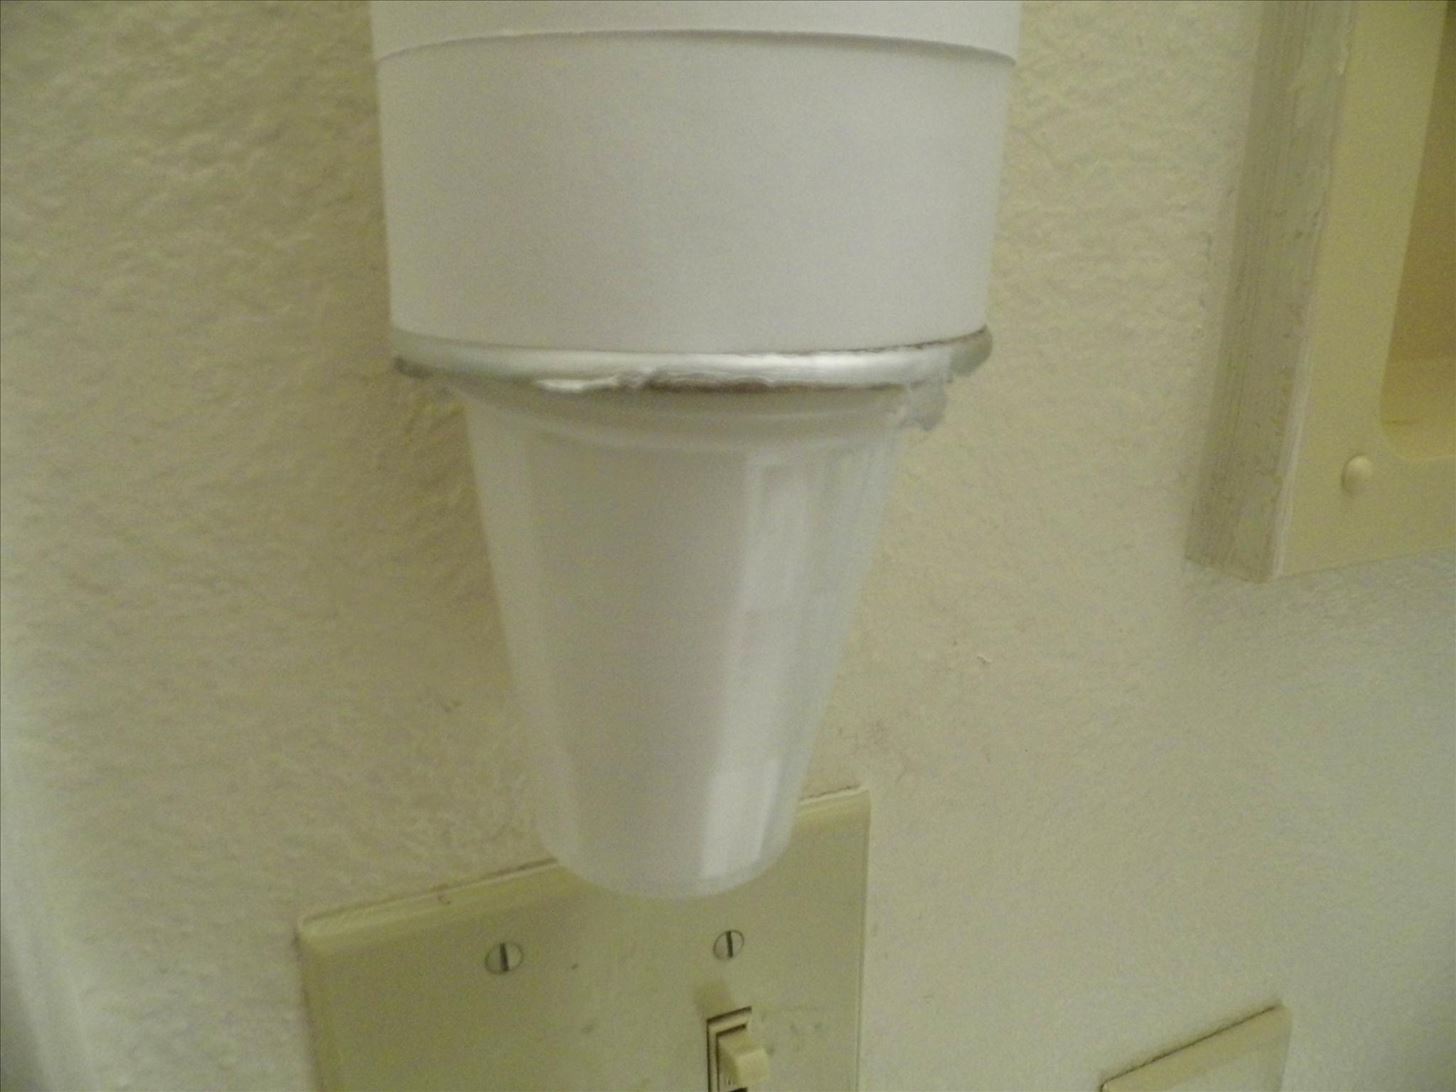 How to Make a Cheap, Stylized Paper Cup Dispenser for Your Bathroom